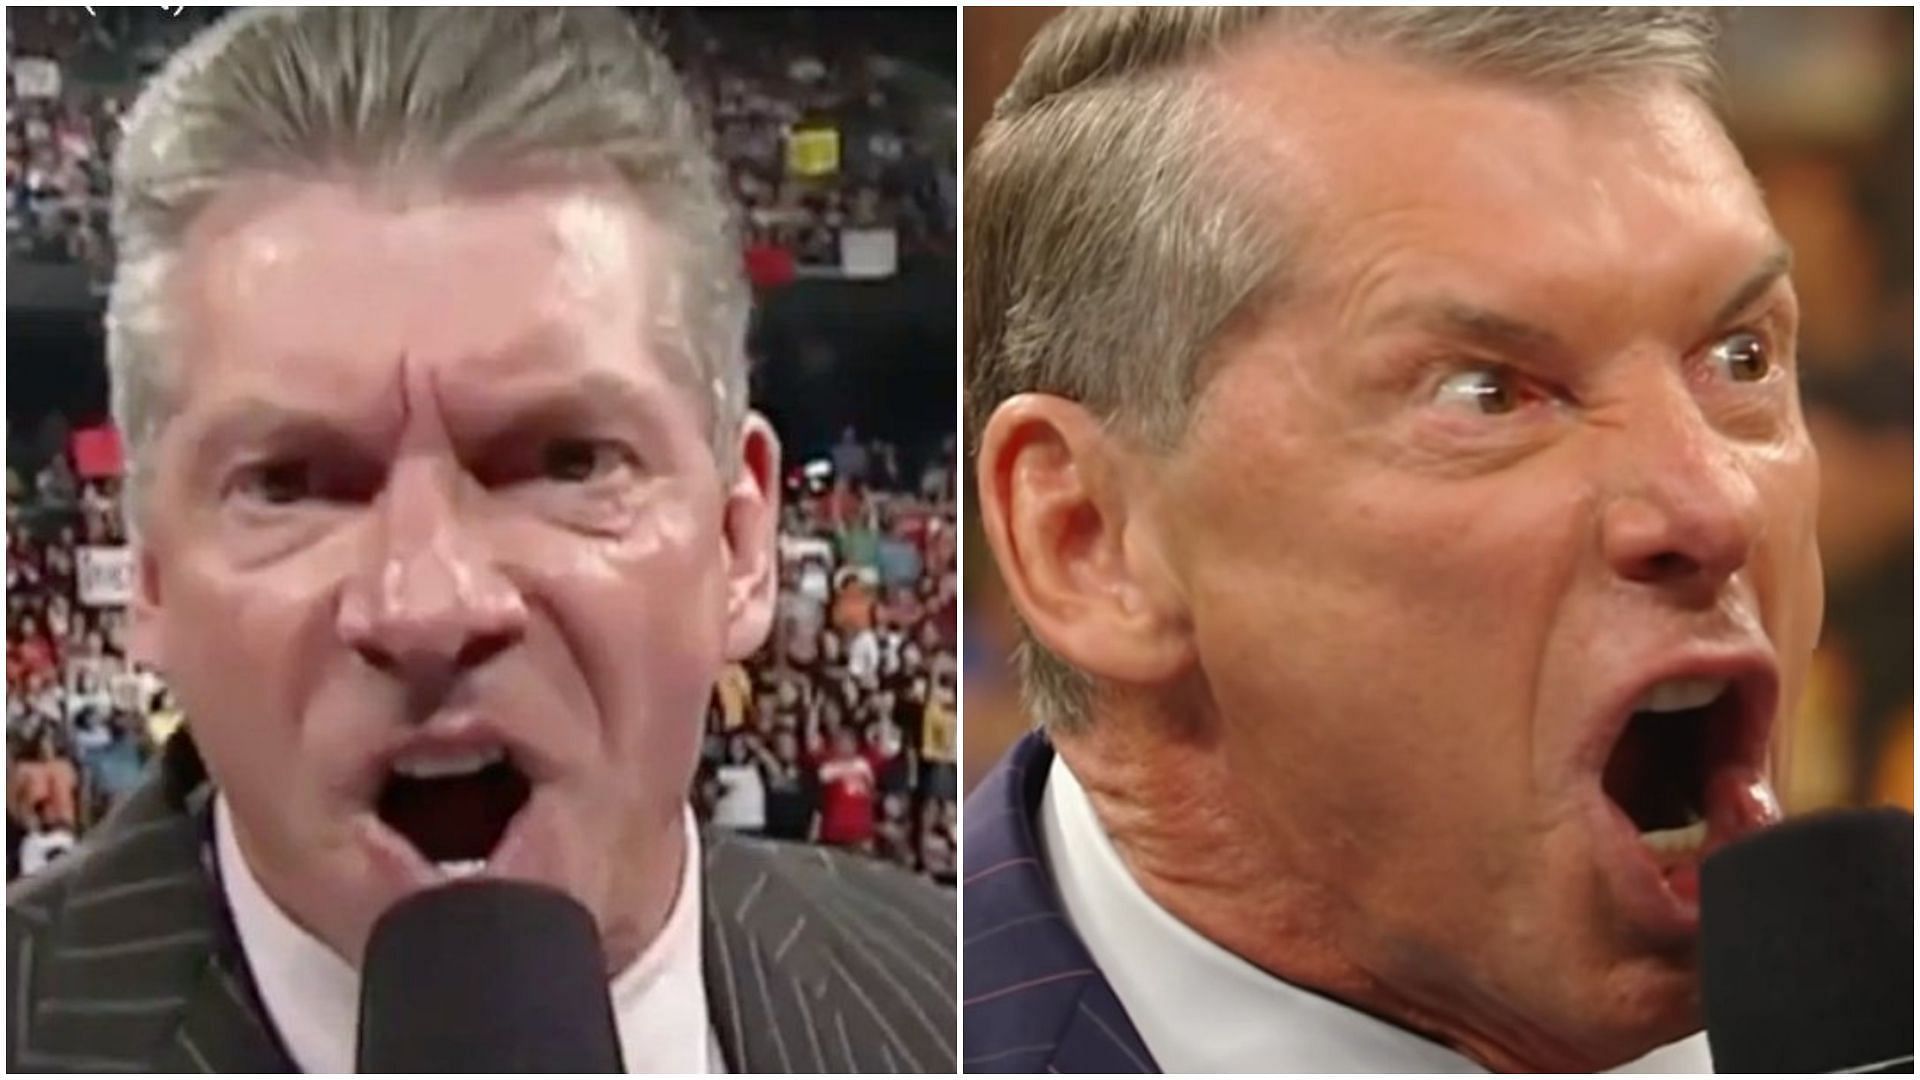 Vince McMahon retired from his role in June 2022.